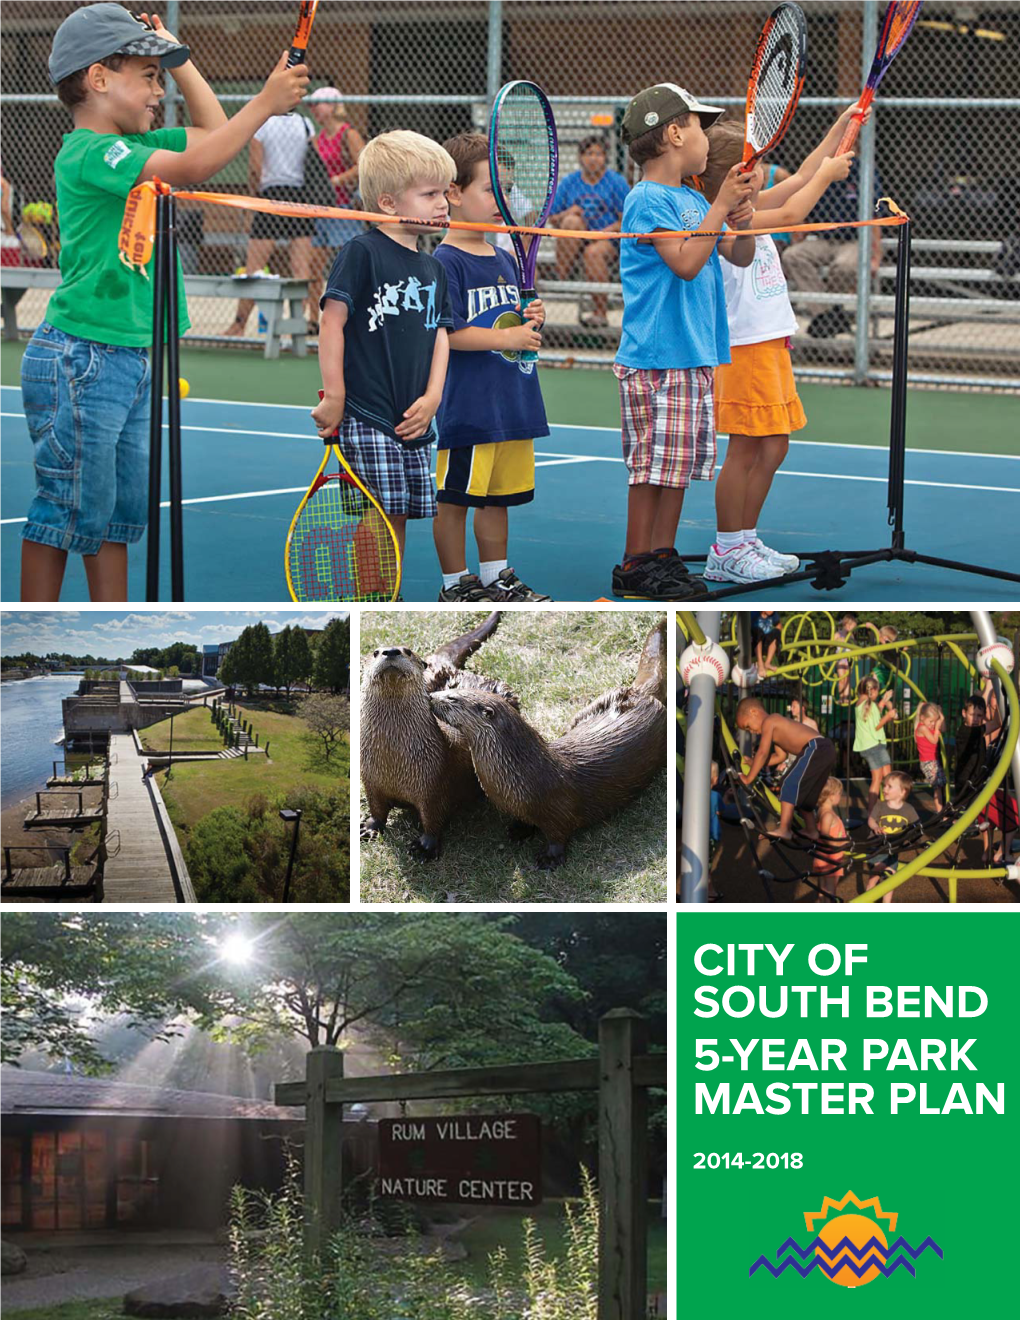 City of South Bend 5-Year Park Master Plan